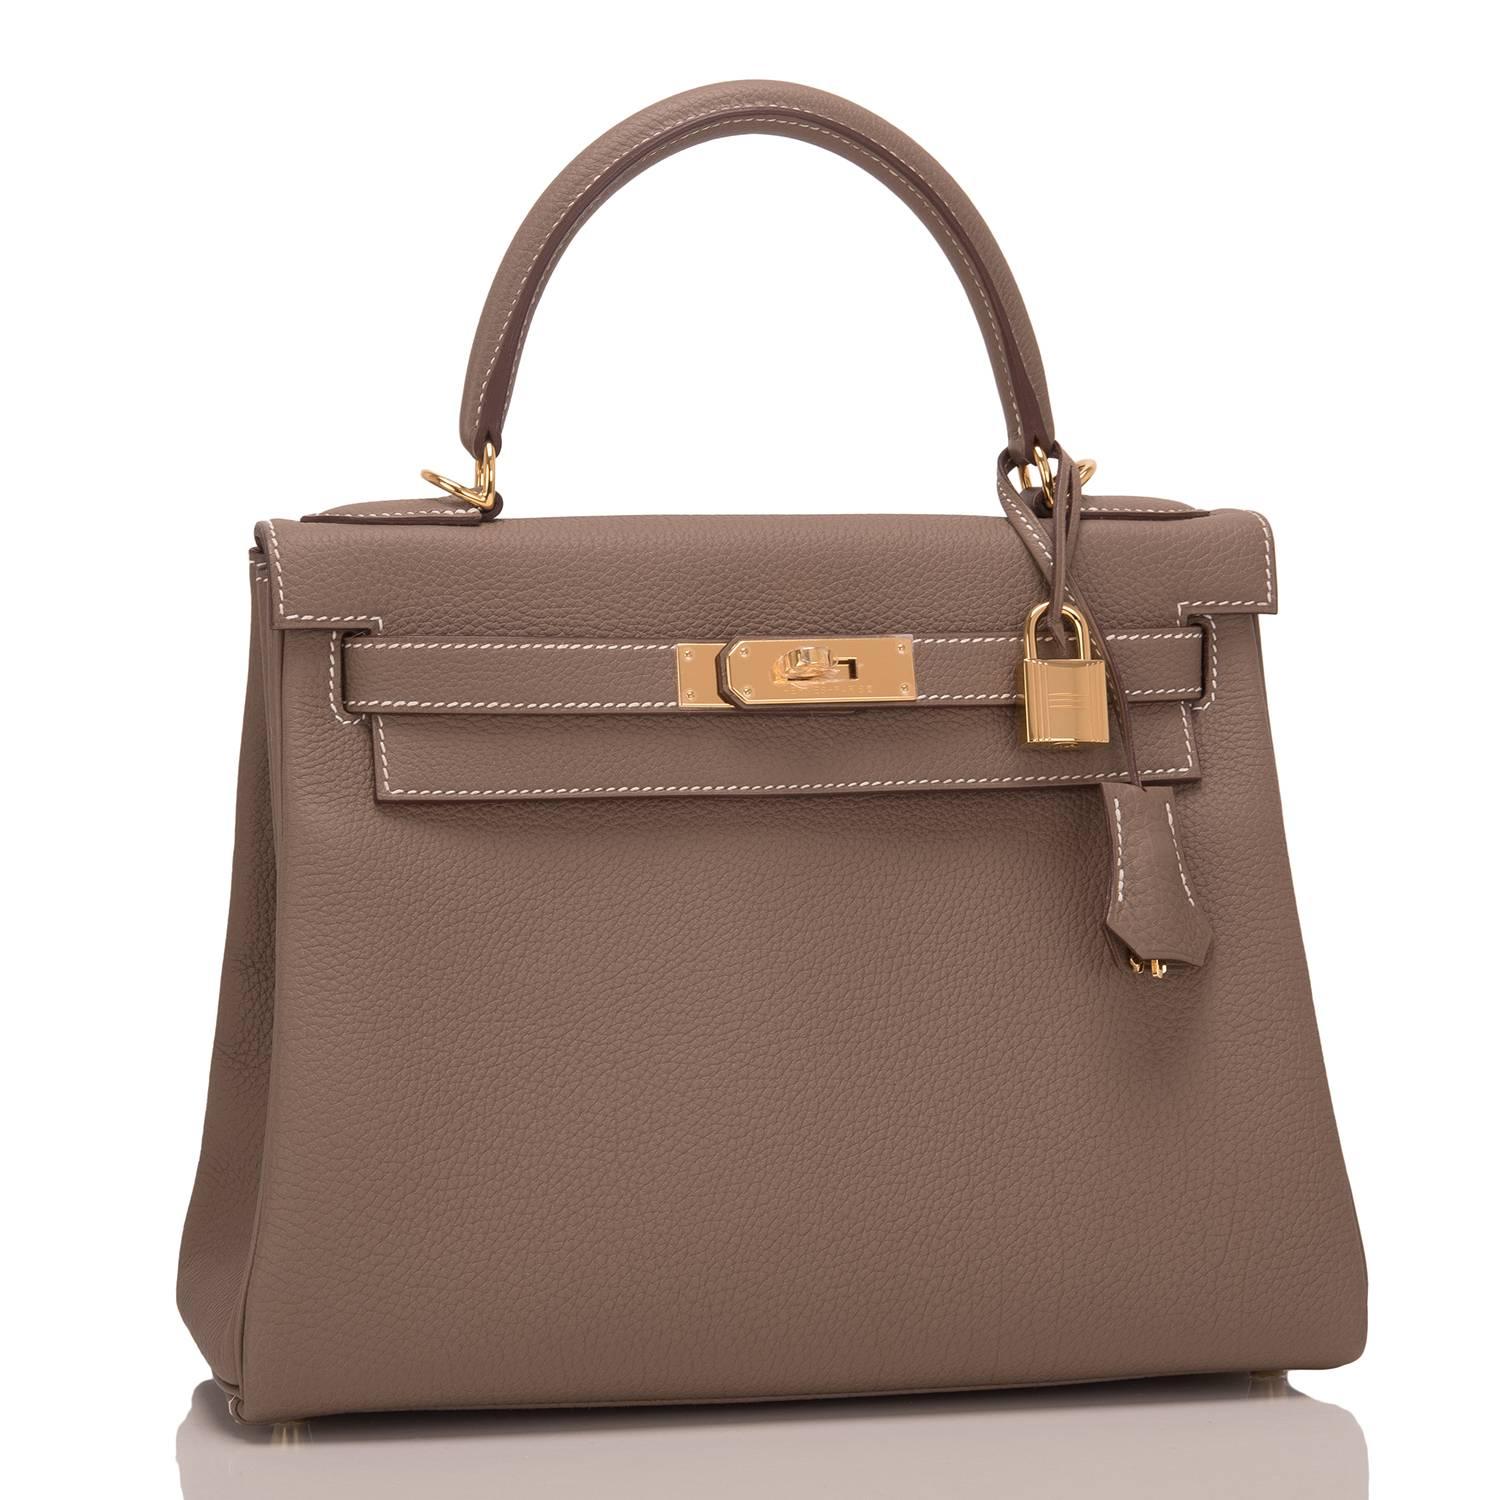 Hermes Etoupe Kelly 28cm of togo leather with gold hardware.

This Kelly, in the Retourne style, has white contrast stitching, a front toggle closure, a clochette with lock and two keys, a single rolled handle, and a removable shoulder